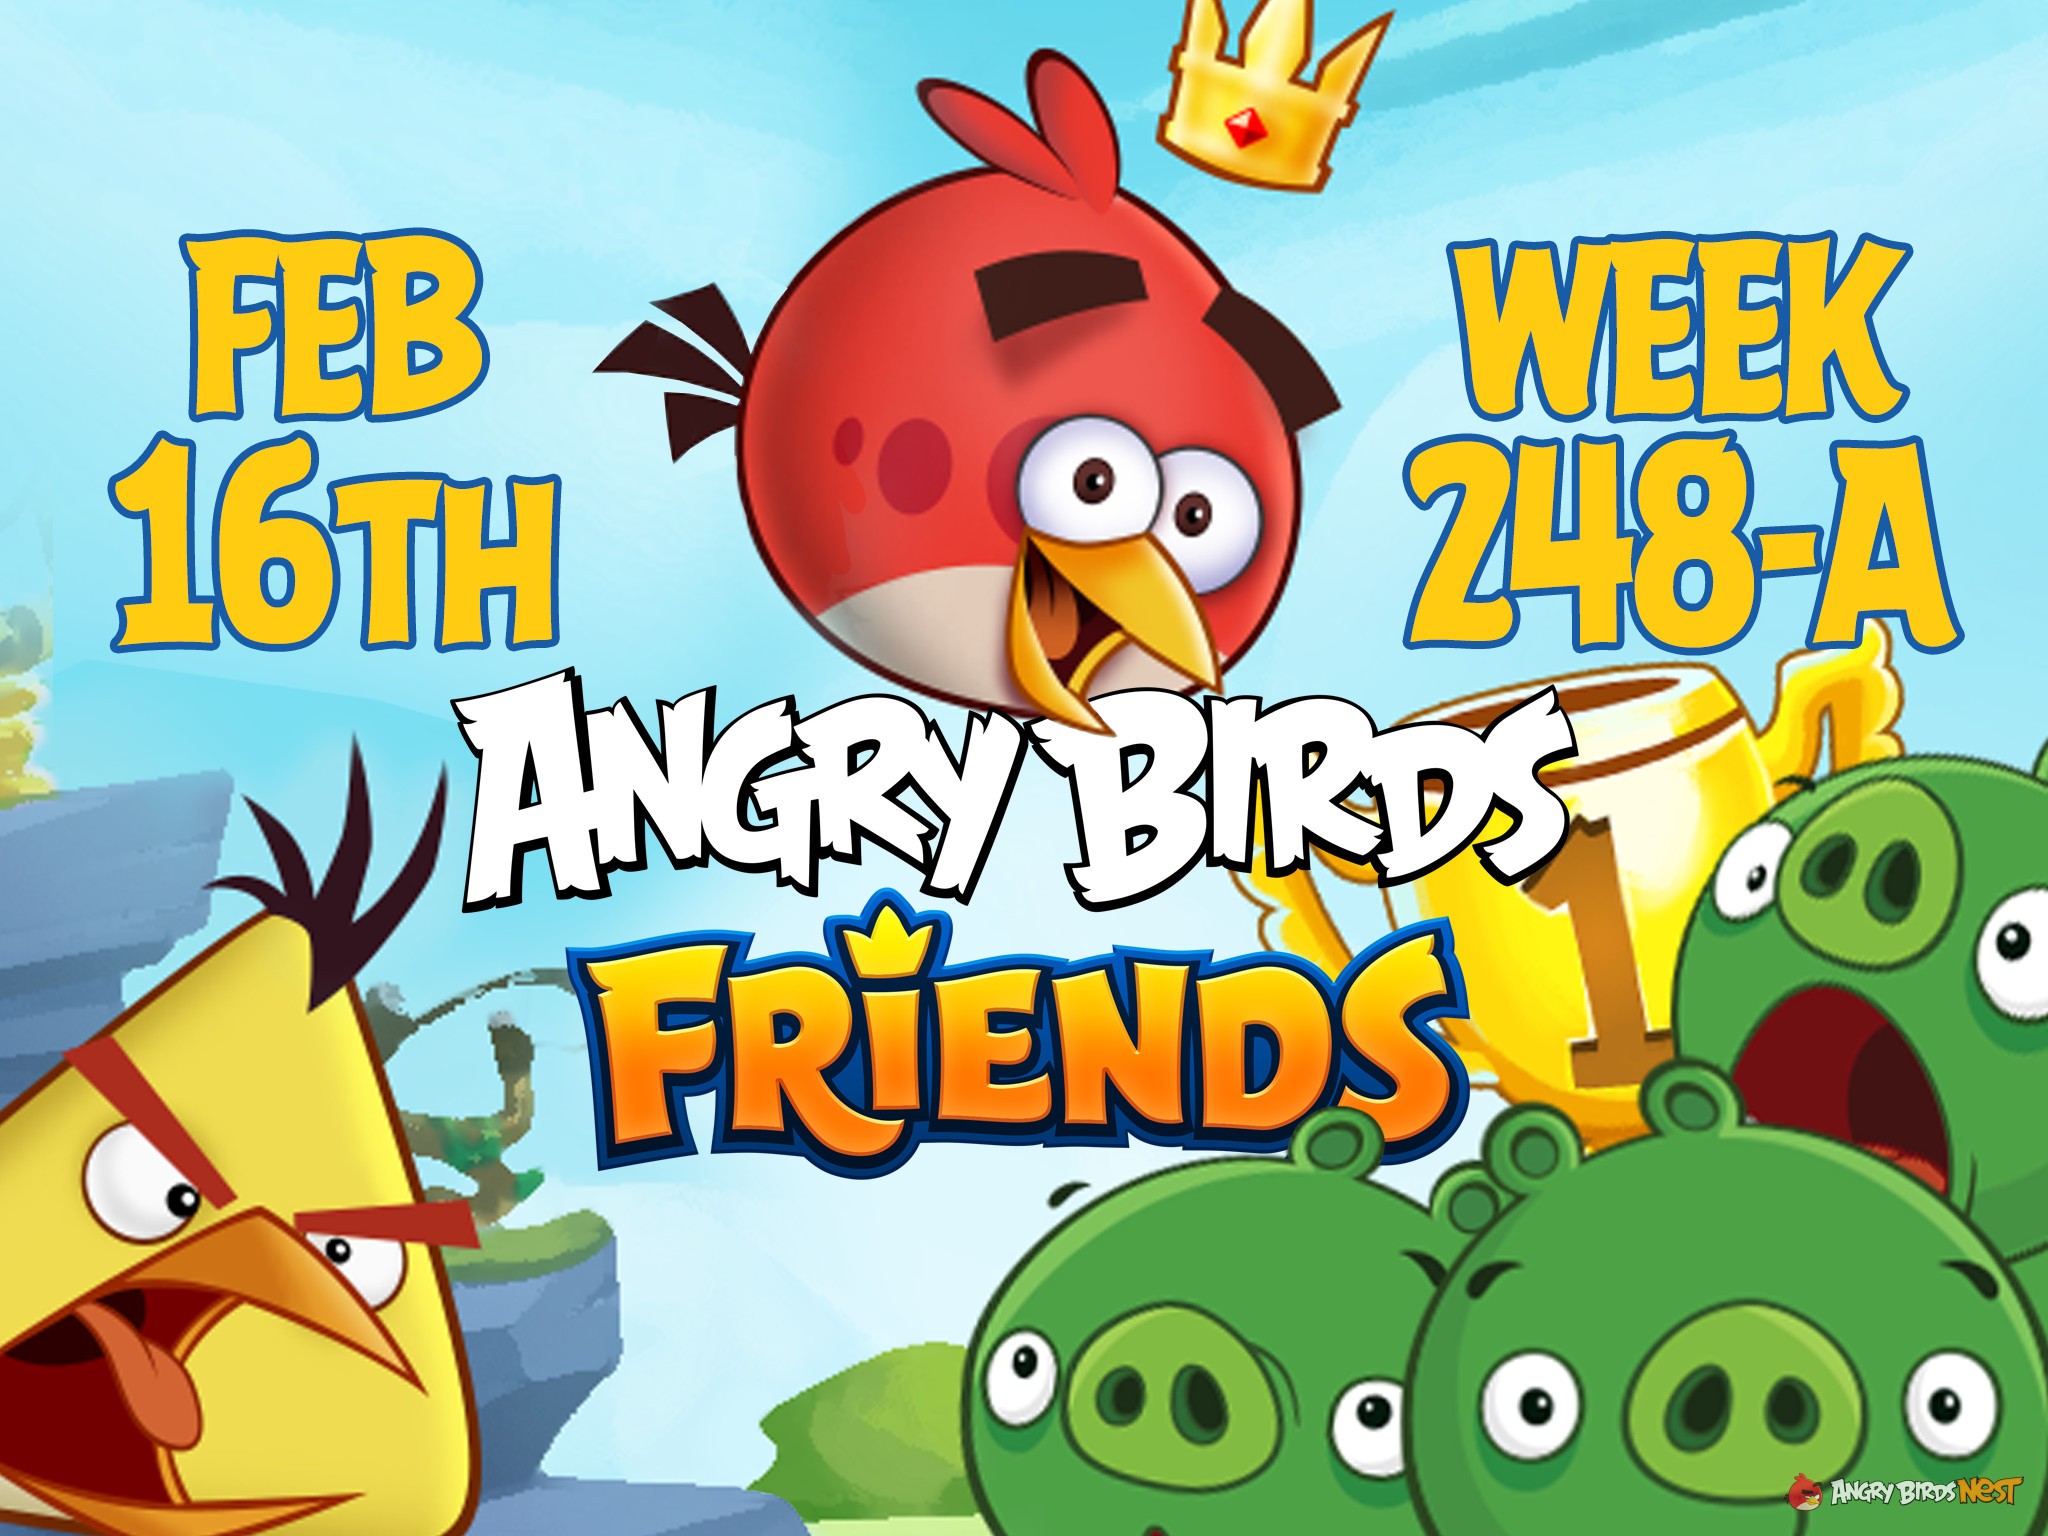 Angry Birds Friends Tournament Week 248-A Feature Image